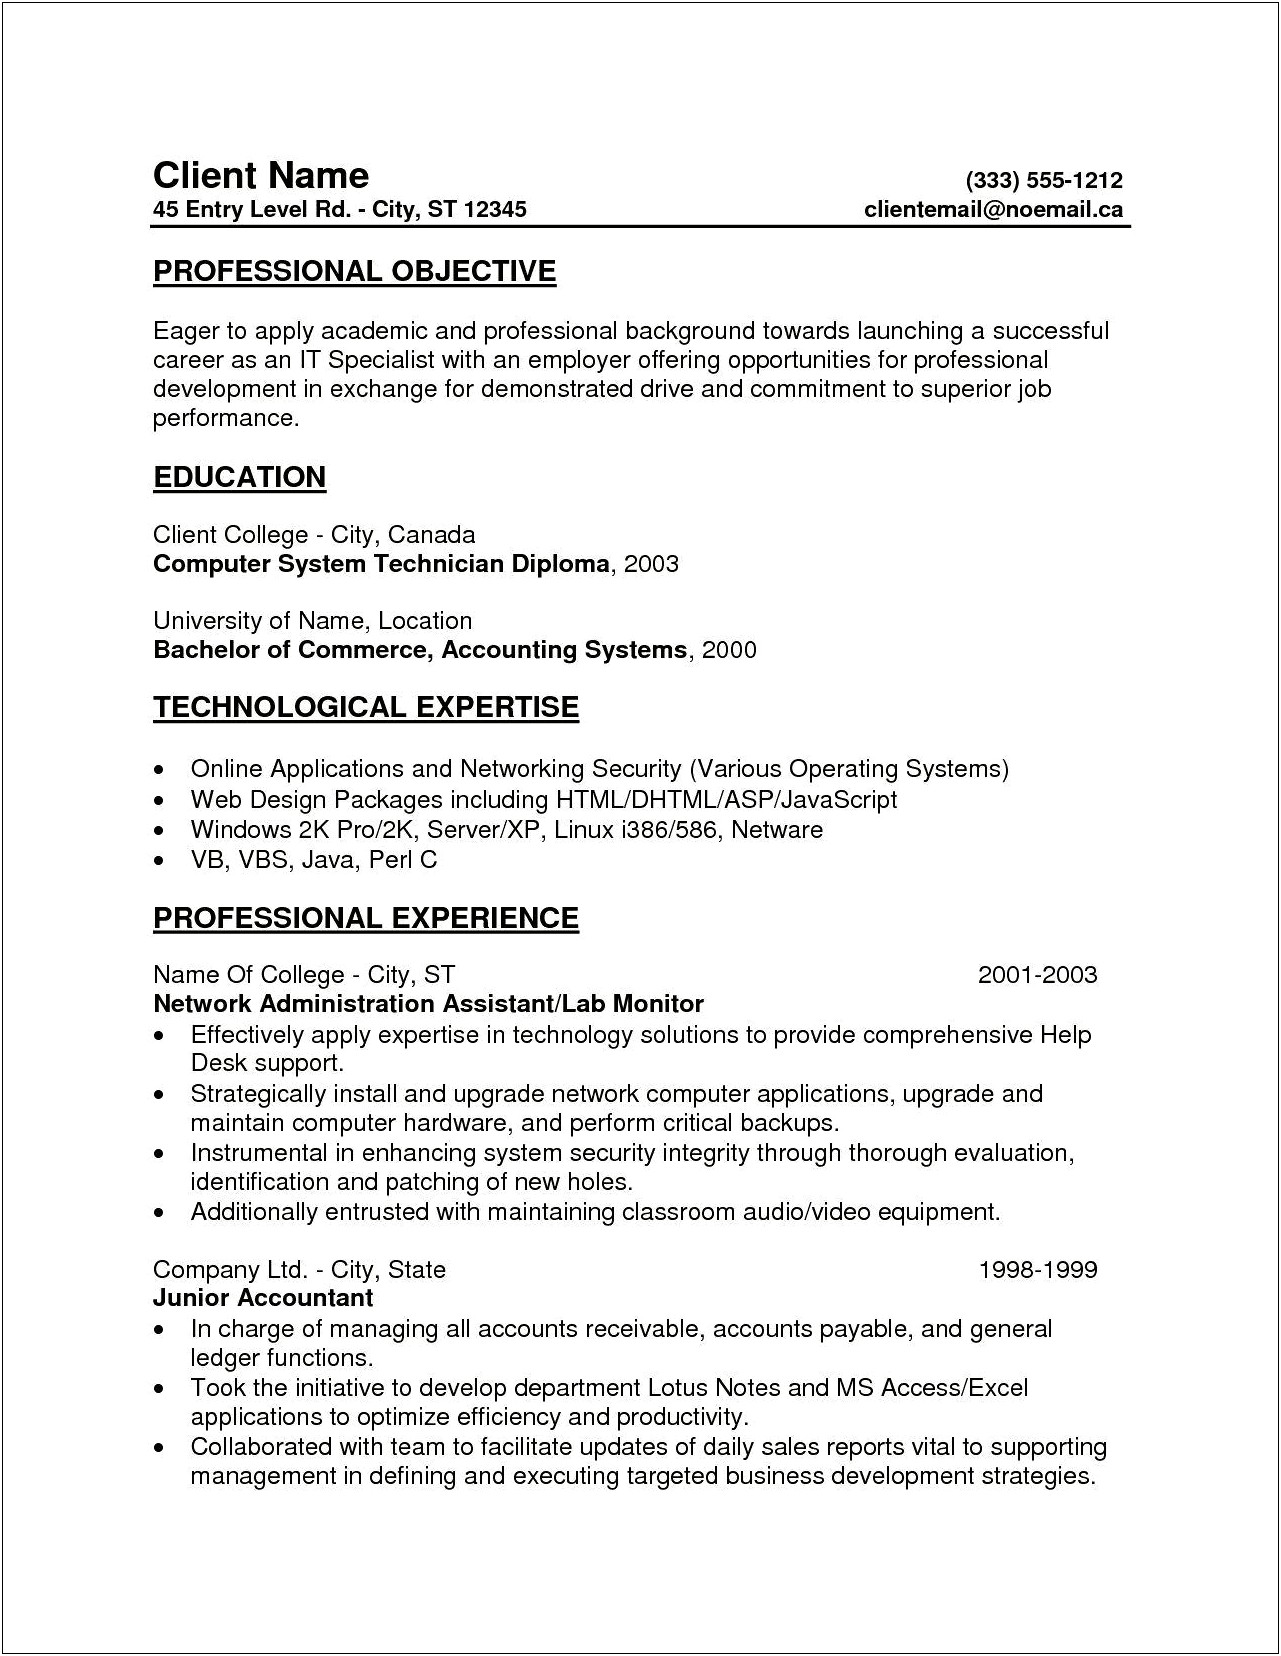 Resume Objective Examples General Jobs